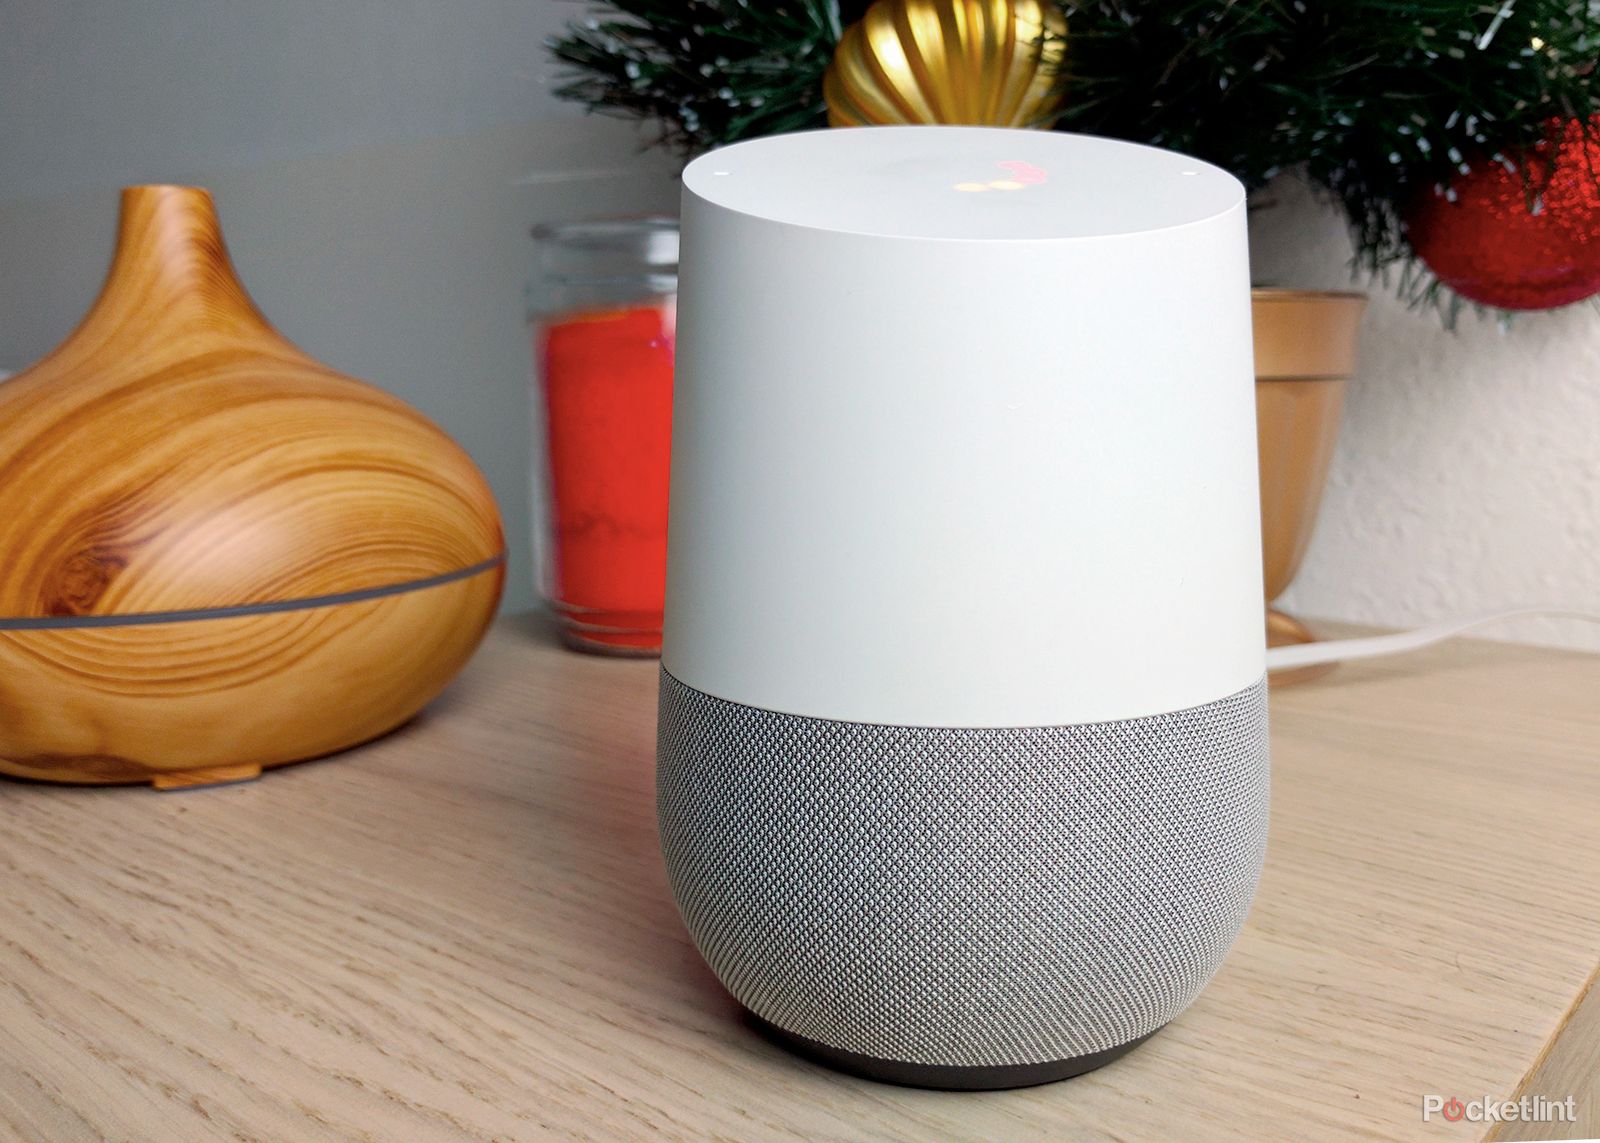 How to fix issues with Google Home and Nest Audio speakers not playing music